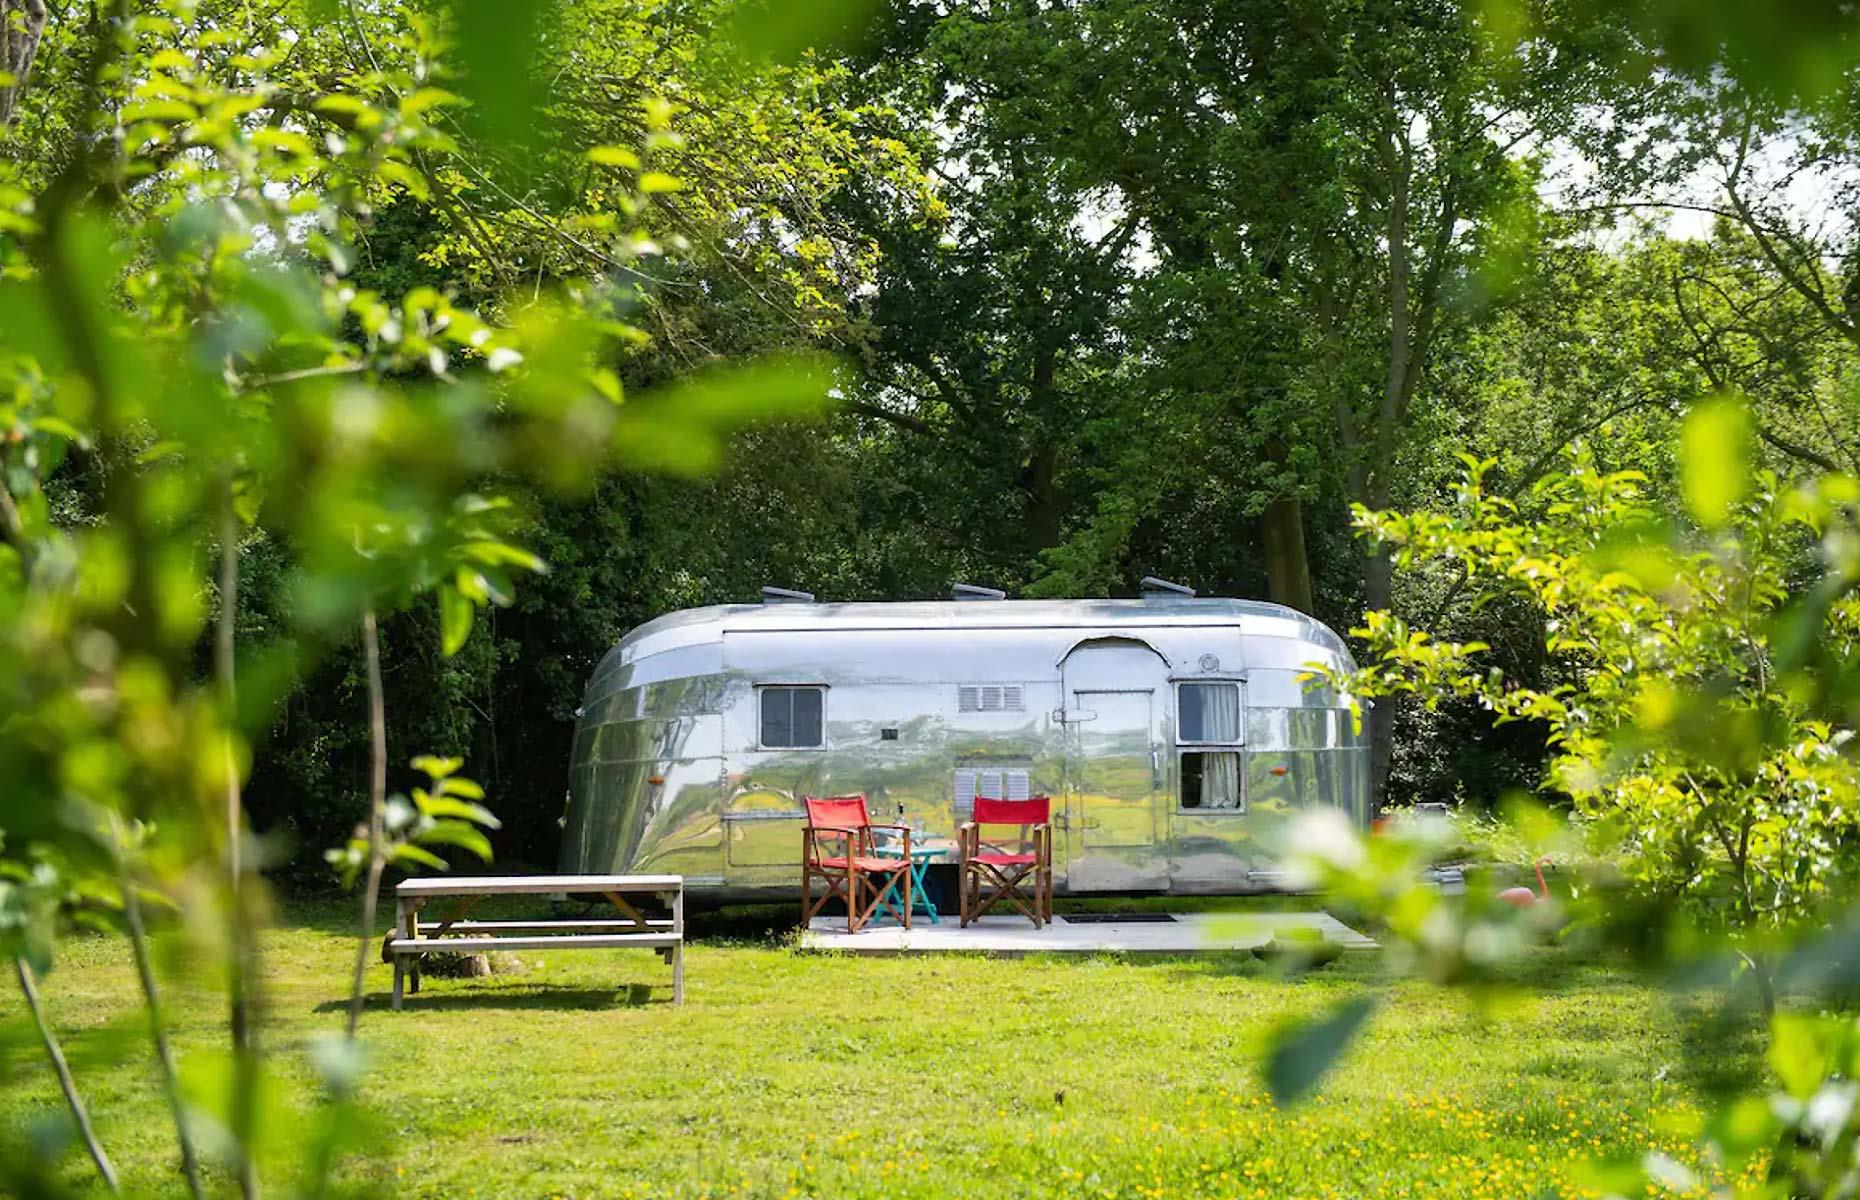 <p>This funky retro Airstream in Mundham, England is available to <a href="https://www.airbnb.co.uk/rooms/18261133">rent on Airbnb</a>. </p>  <p>The 1957 trailer is parked in a quiet clearing in picturesque woodlands and is fully kitted out to accommodate a comfortable stay for a couple or small family. </p>